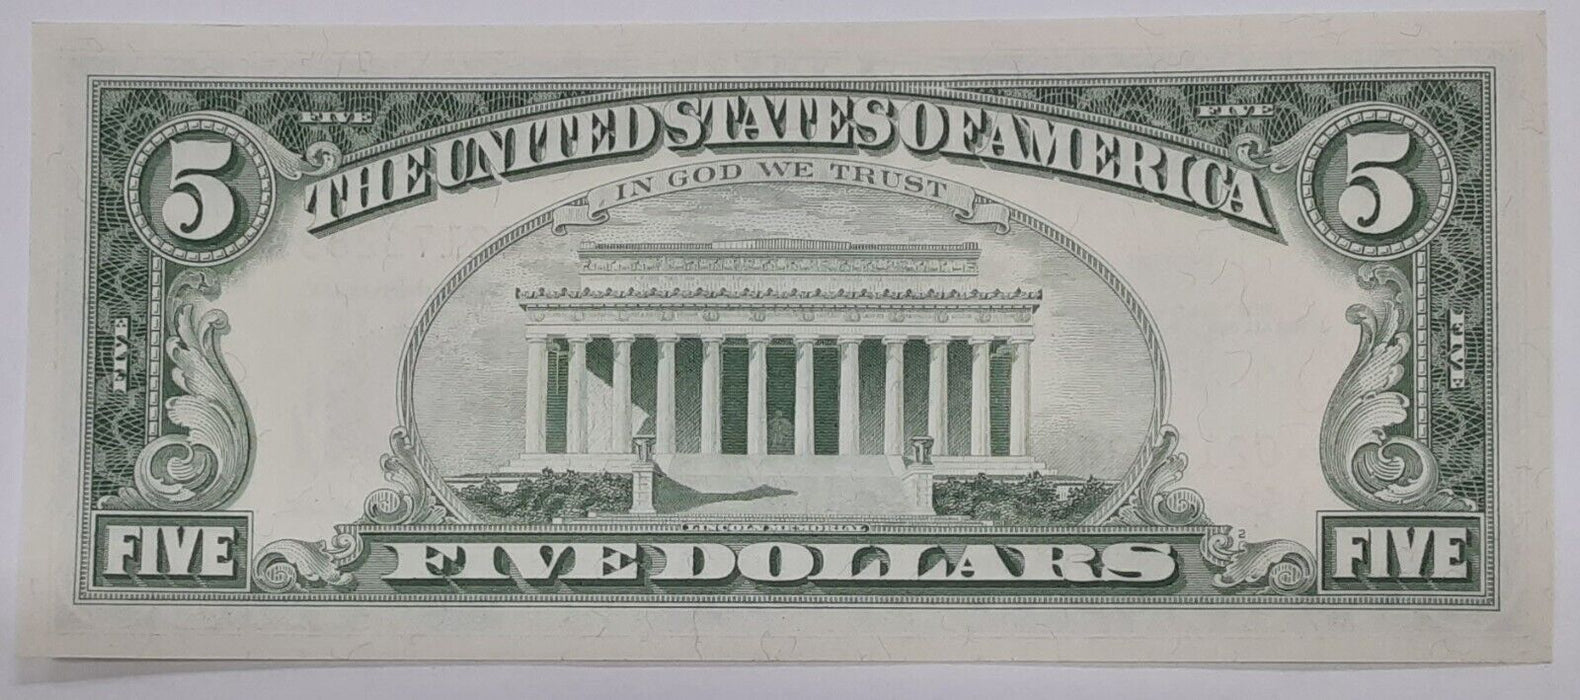 Series 1963 $5 United States STAR Note - Crisp UNC Condition - See Photos